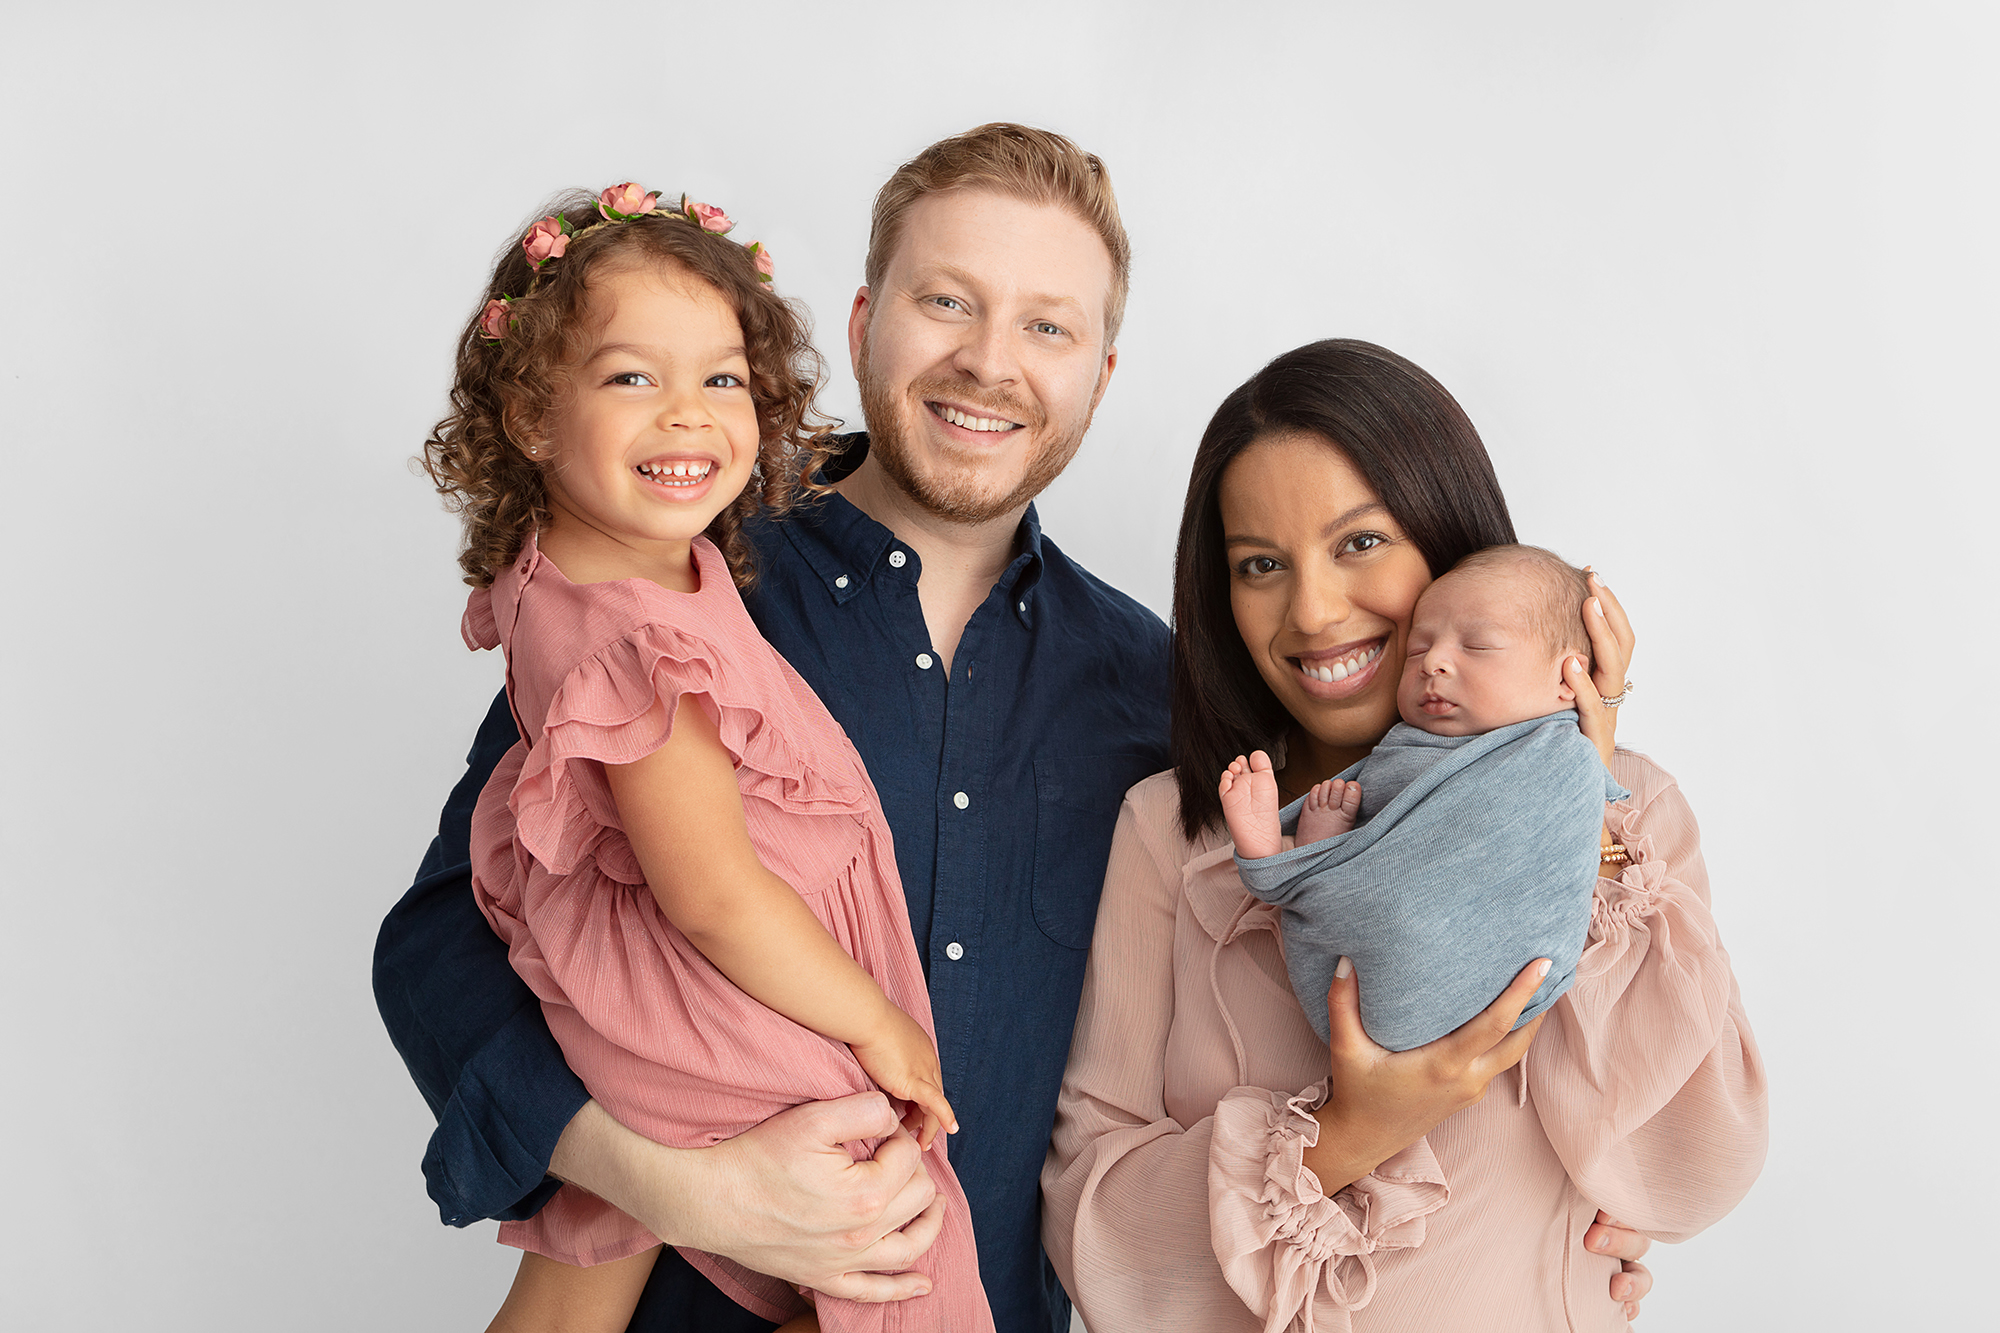 beautiful multiracial family of four smiling at the camera, mom is holding up their newborn who is wrapped in a dusty blue swaddle, soft blue and pink family color palette for photos